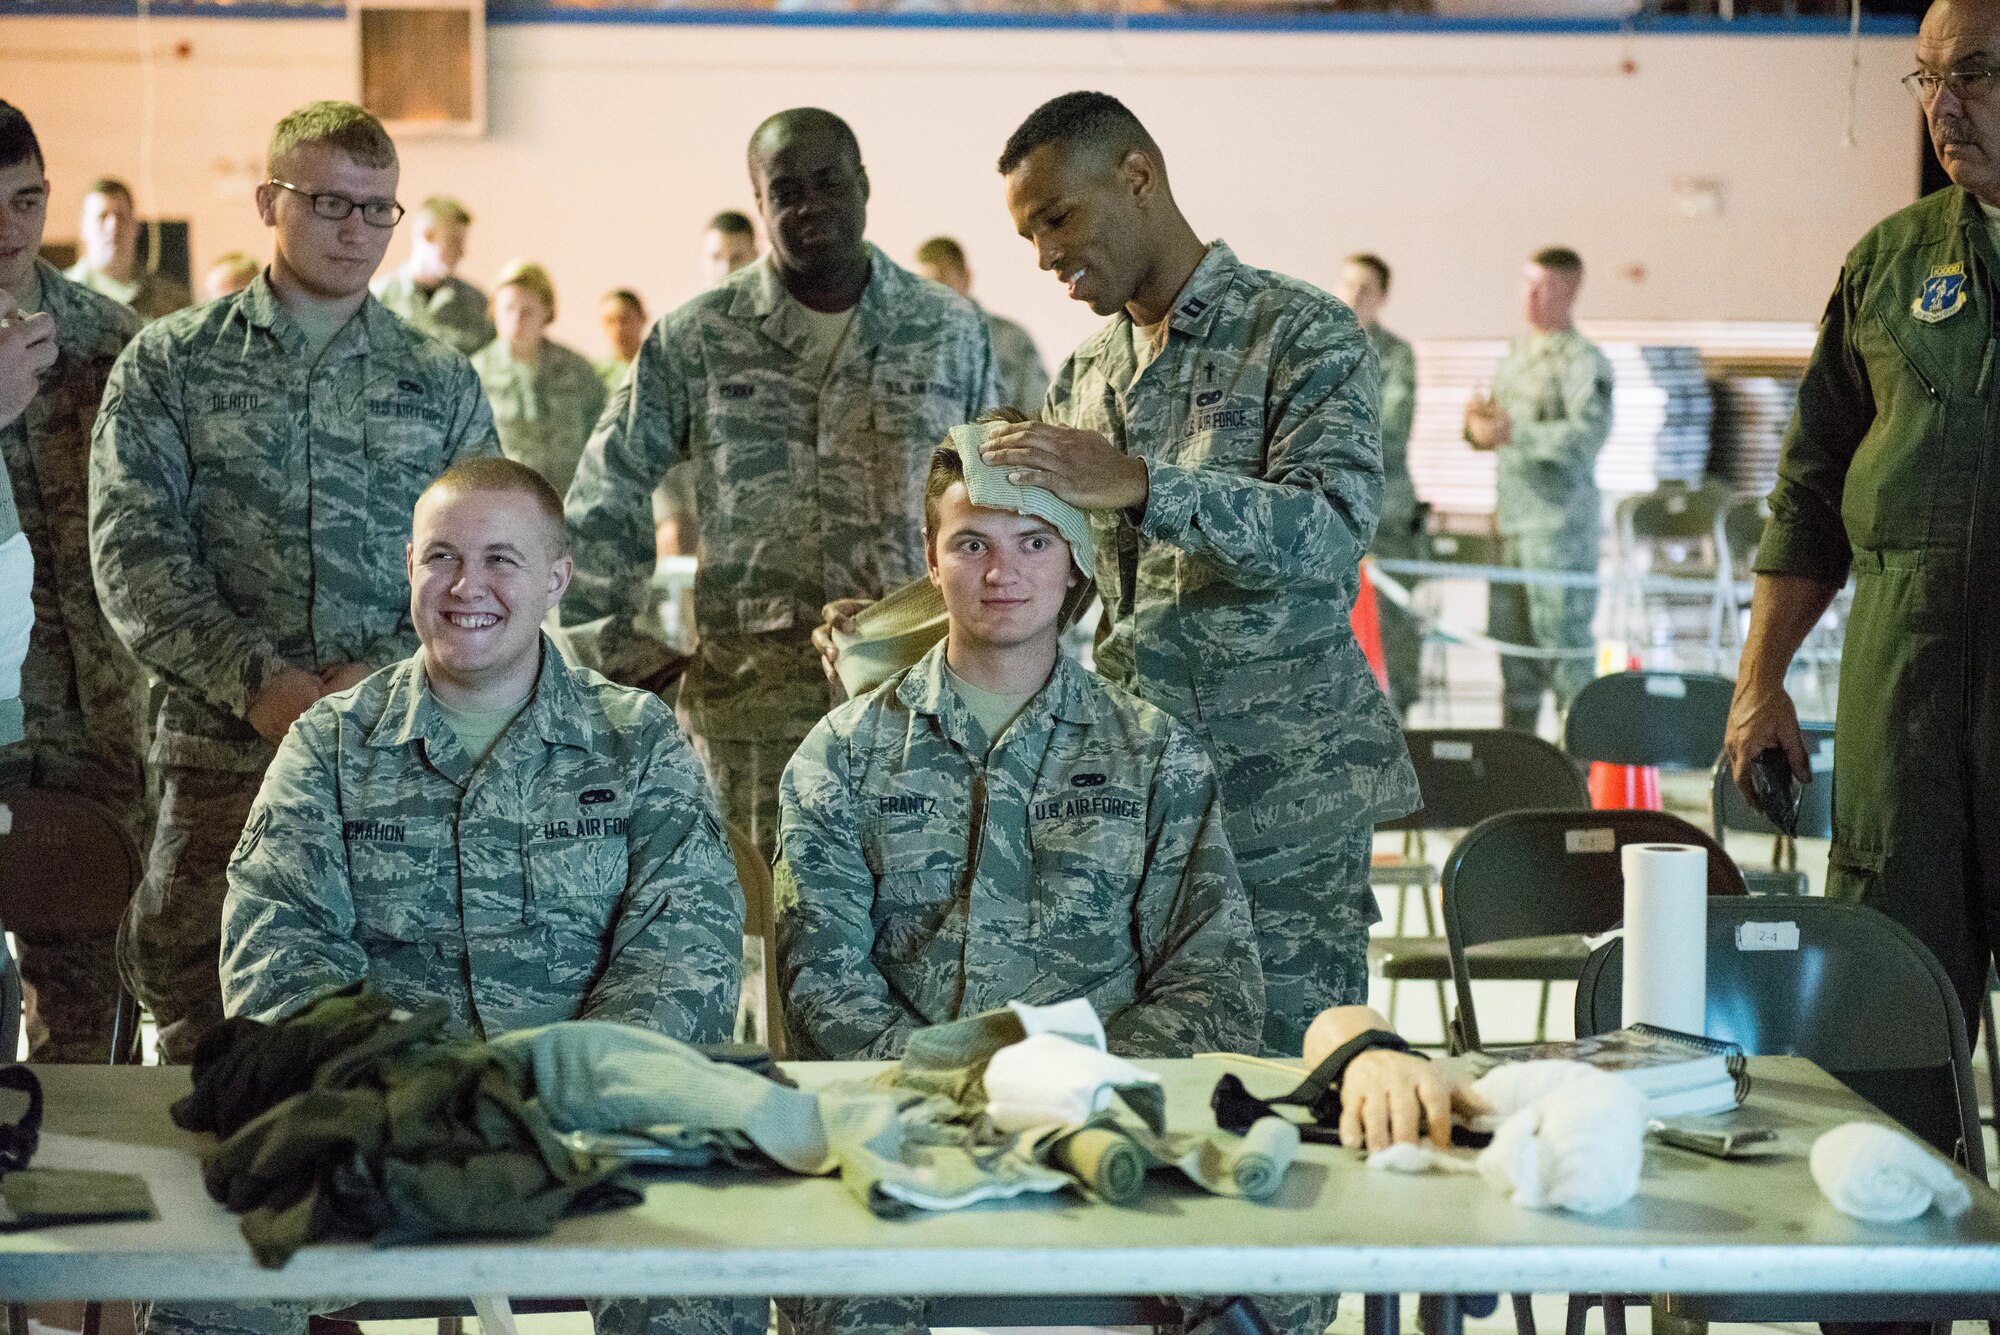 Capt. Jumaane Green (far right), a Chaplin at the 167th Airlift Wing in Martinsburg, W.Va., wraps the head of Airman 1st Class Daniel Frantz (middle), a member of the 167th, while Airman 1st Class Shawn Mcmahon (left) waits his turn during Self Aide Buddy Care (SABC) training, June 9, 2017. A training rodeo, set up by base training, members were able to complete the required Self Aide Buddy Care (SABC), Law of Armed Conflict and Chemical Biological Radiological and Explosive training. (U.S. Air National Guard photo by Staff Sgt. Jodie Witmer)